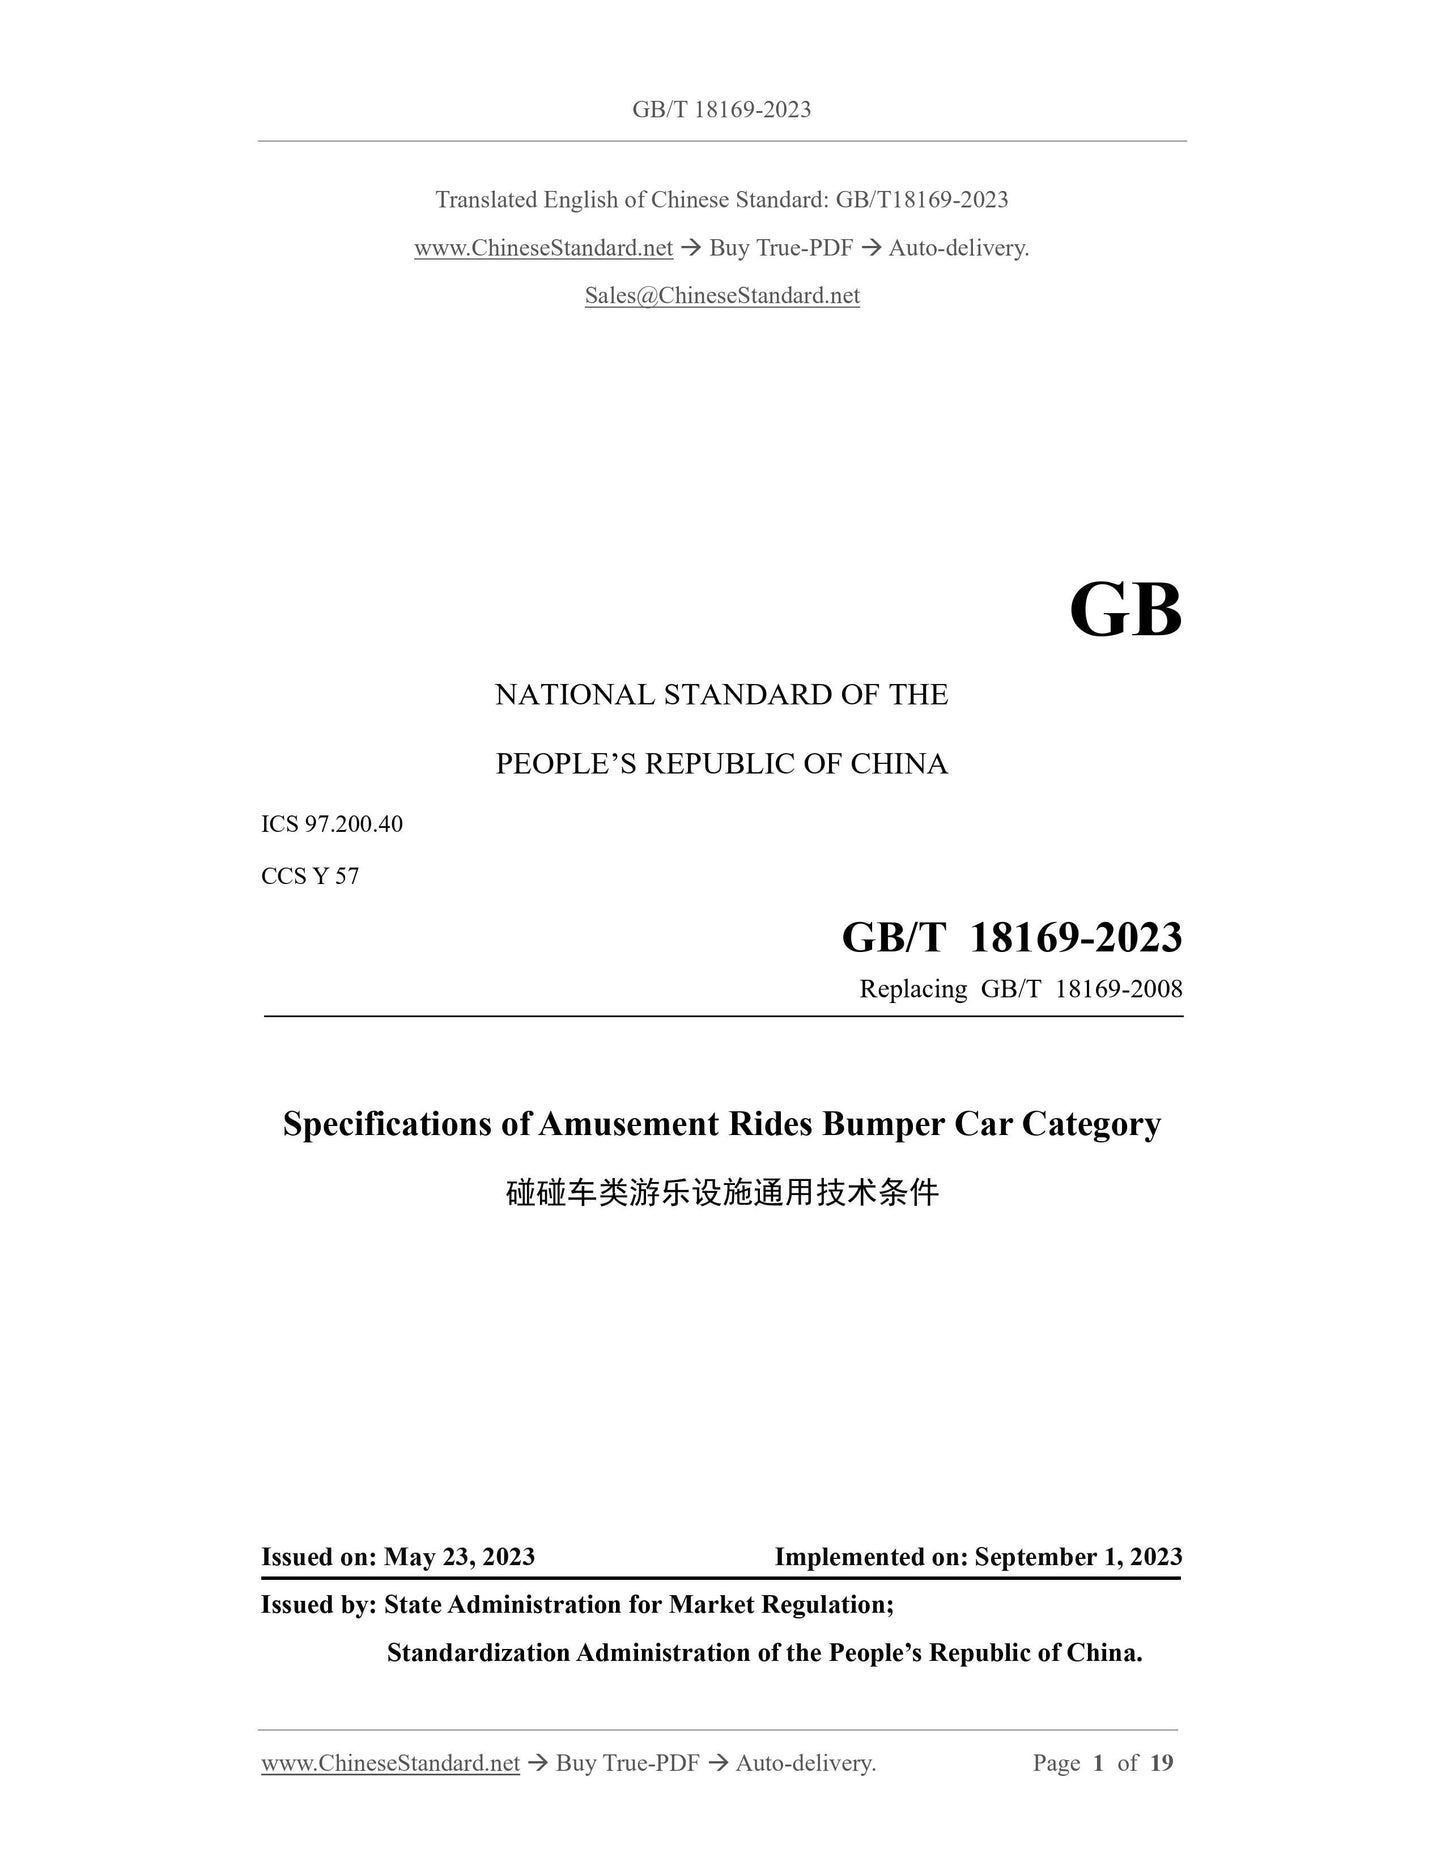 GB/T 18169-2023 Page 1